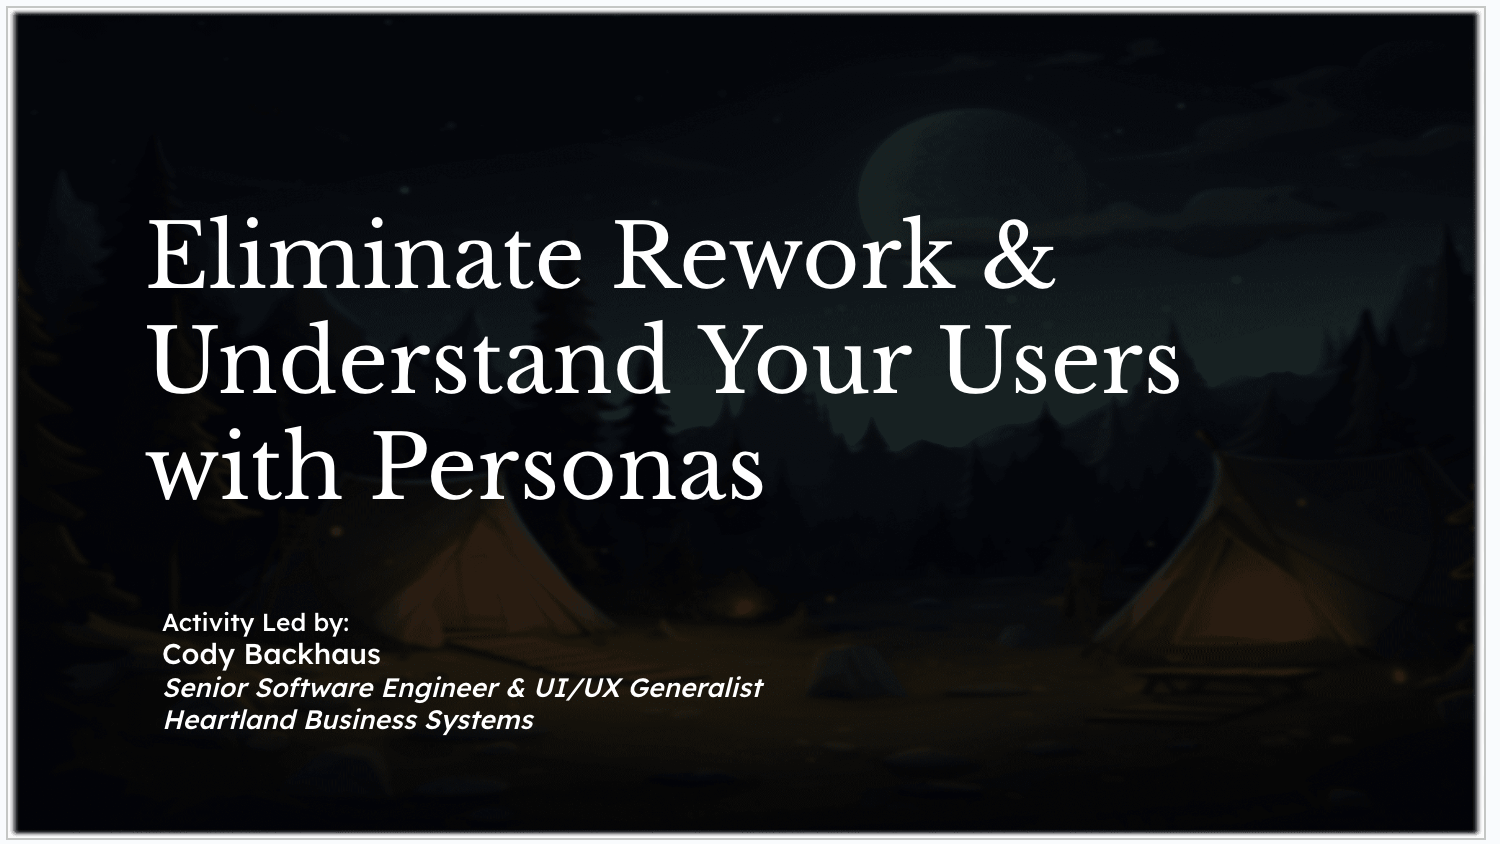 Eliminate Rework & Understand Your Users with Personas